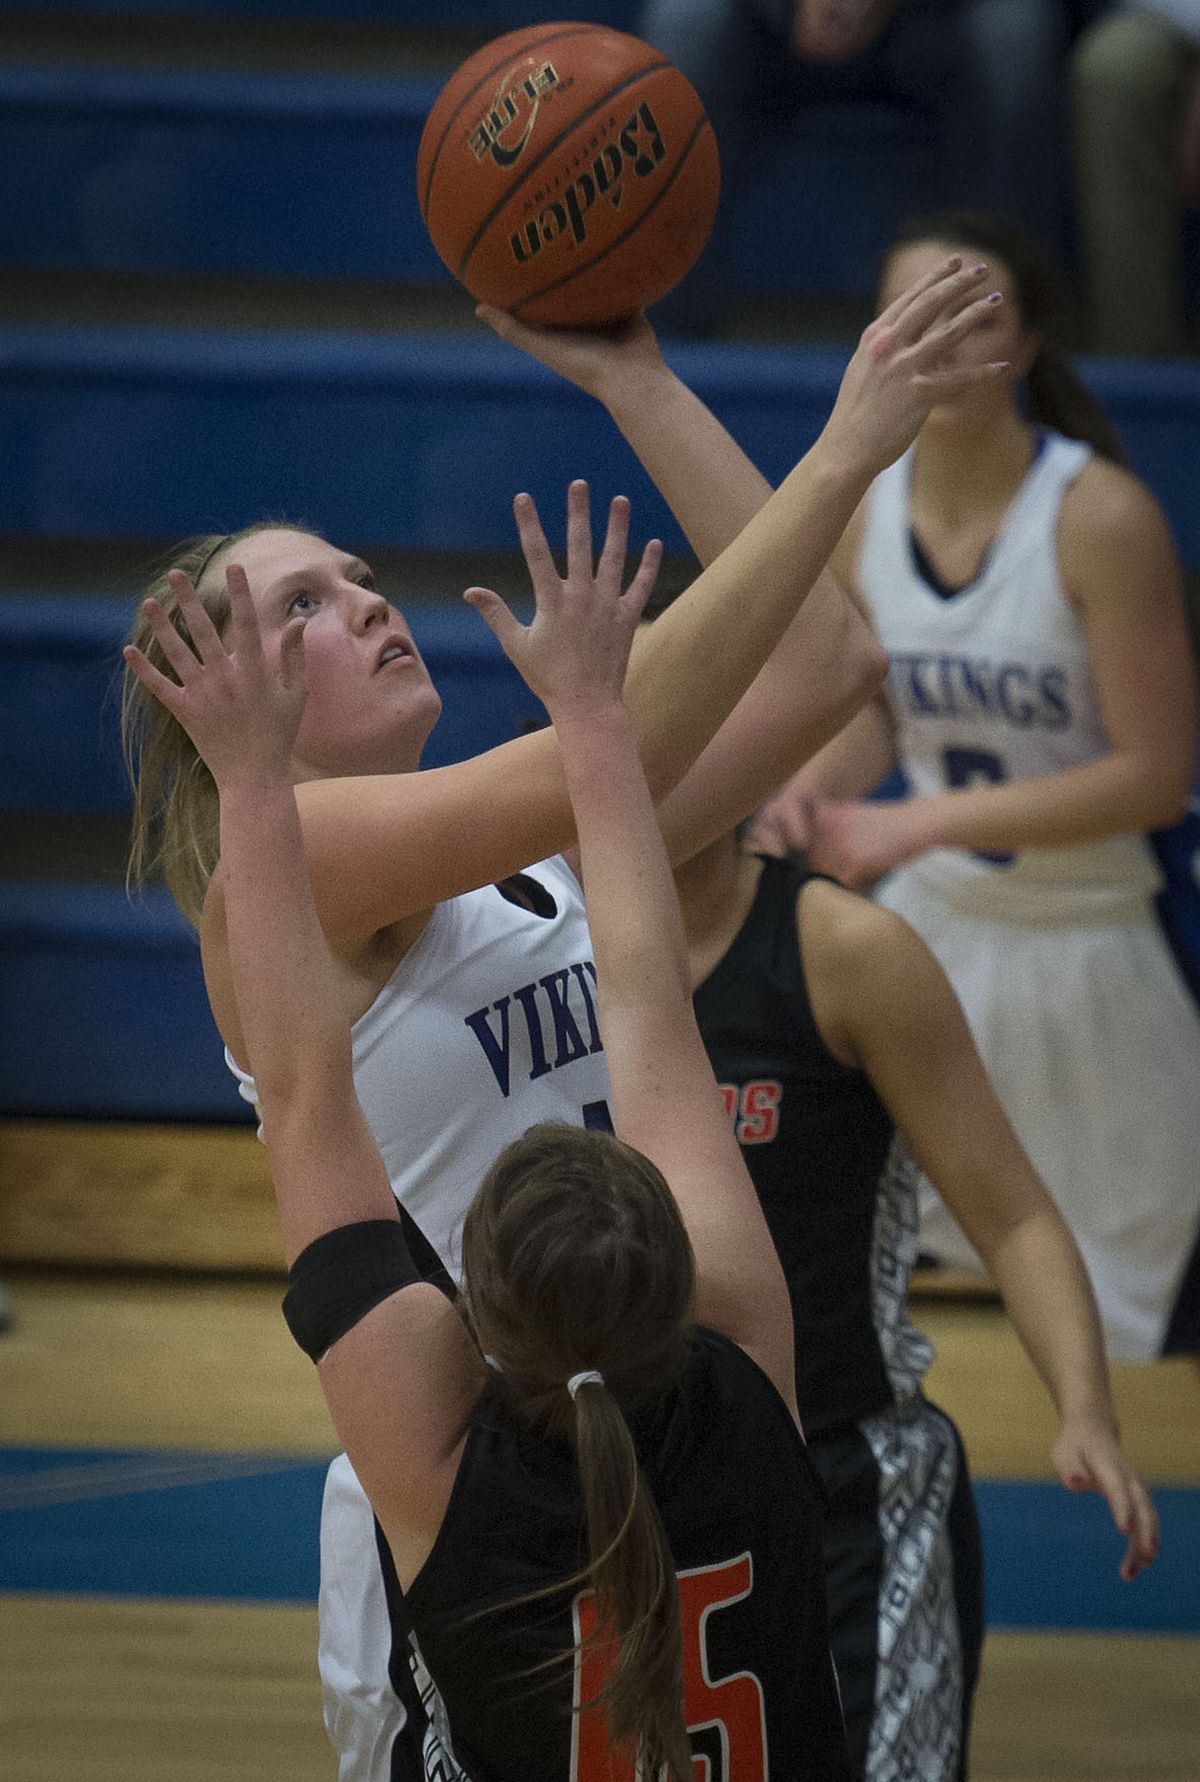 Coeur d’Alene’s Sydney Williams takes a shot as Post Falls’ Madison King defends. (Colin Mulvany)